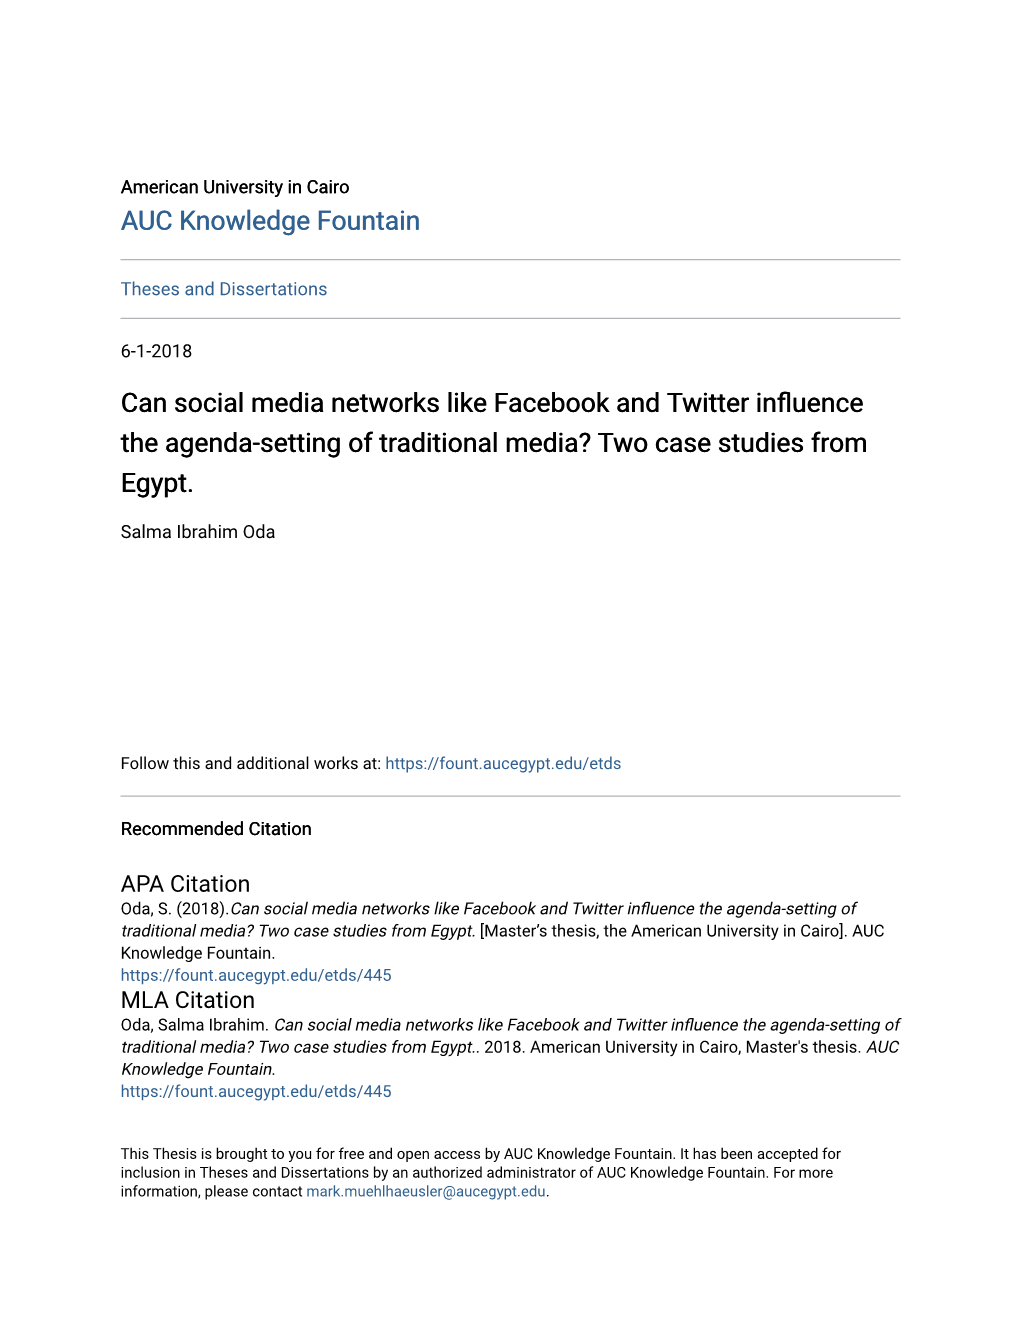 Can Social Media Networks Like Facebook and Twitter Influence the Agenda-Setting of Traditional Media? Two Case Studies from Egypt